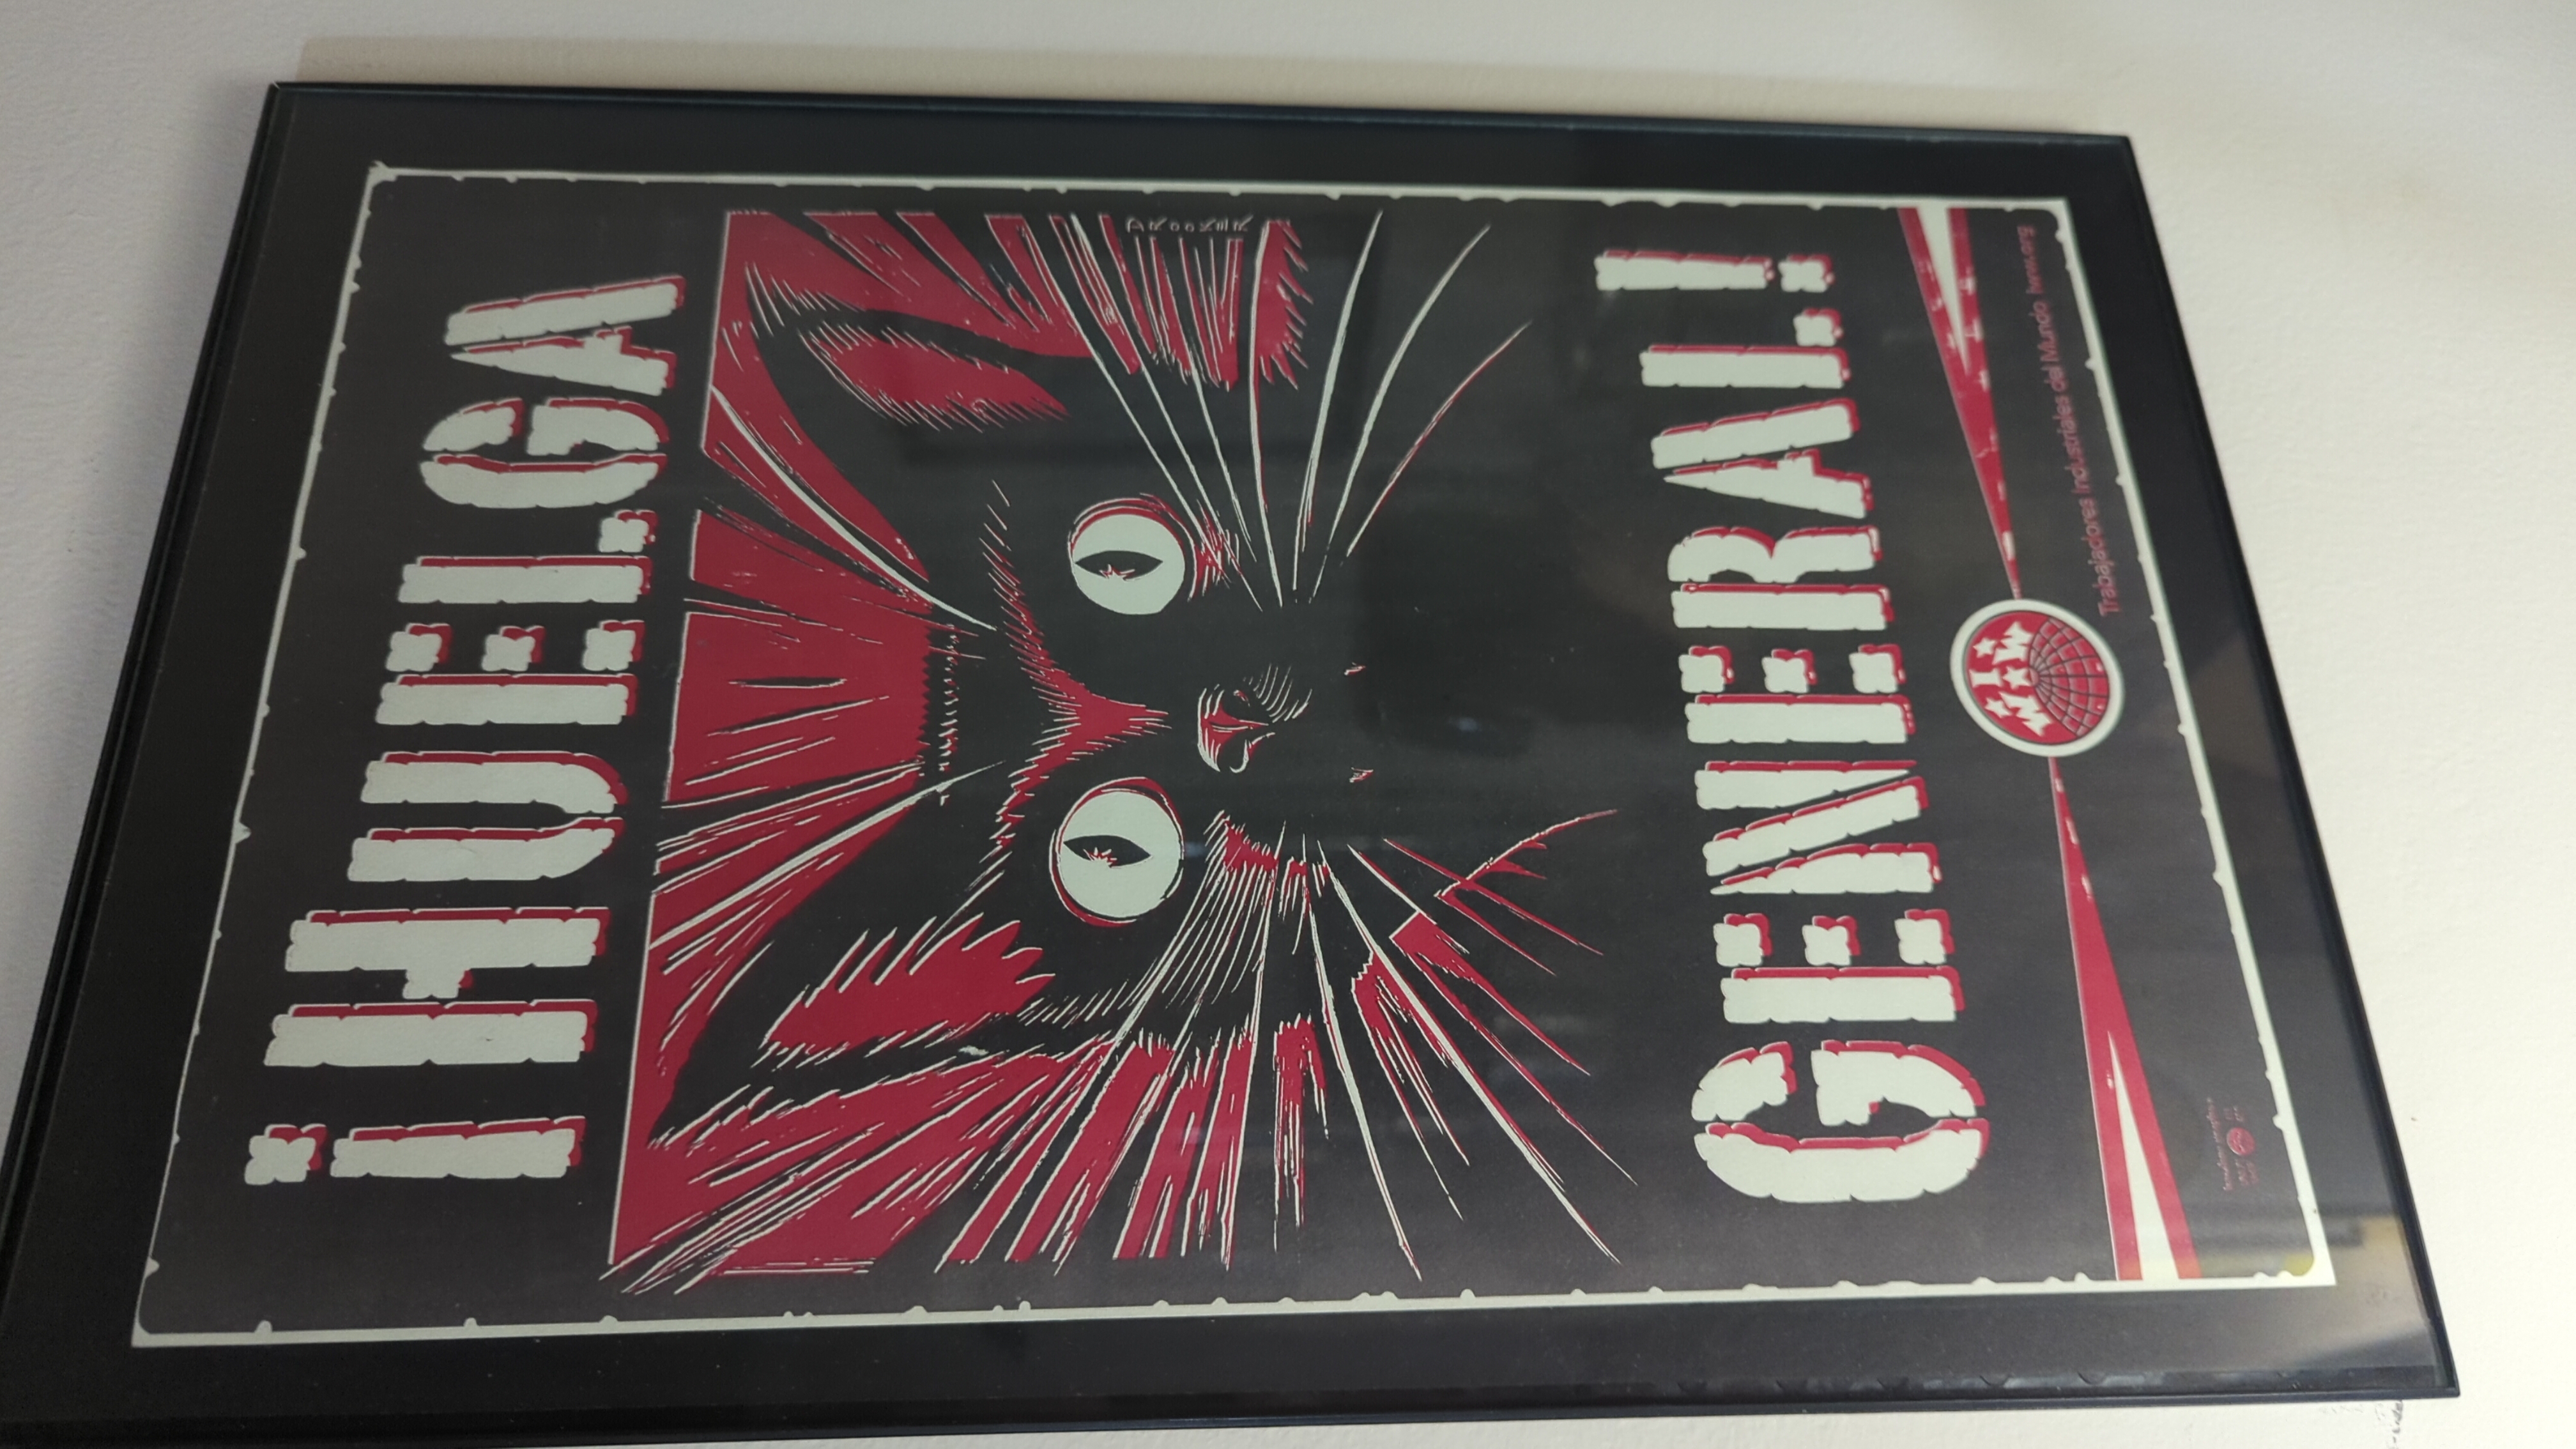 A framed IWW poster featuring the cat sabo-tabby, and the text ¡Huelga General! or "General Strike" in English.